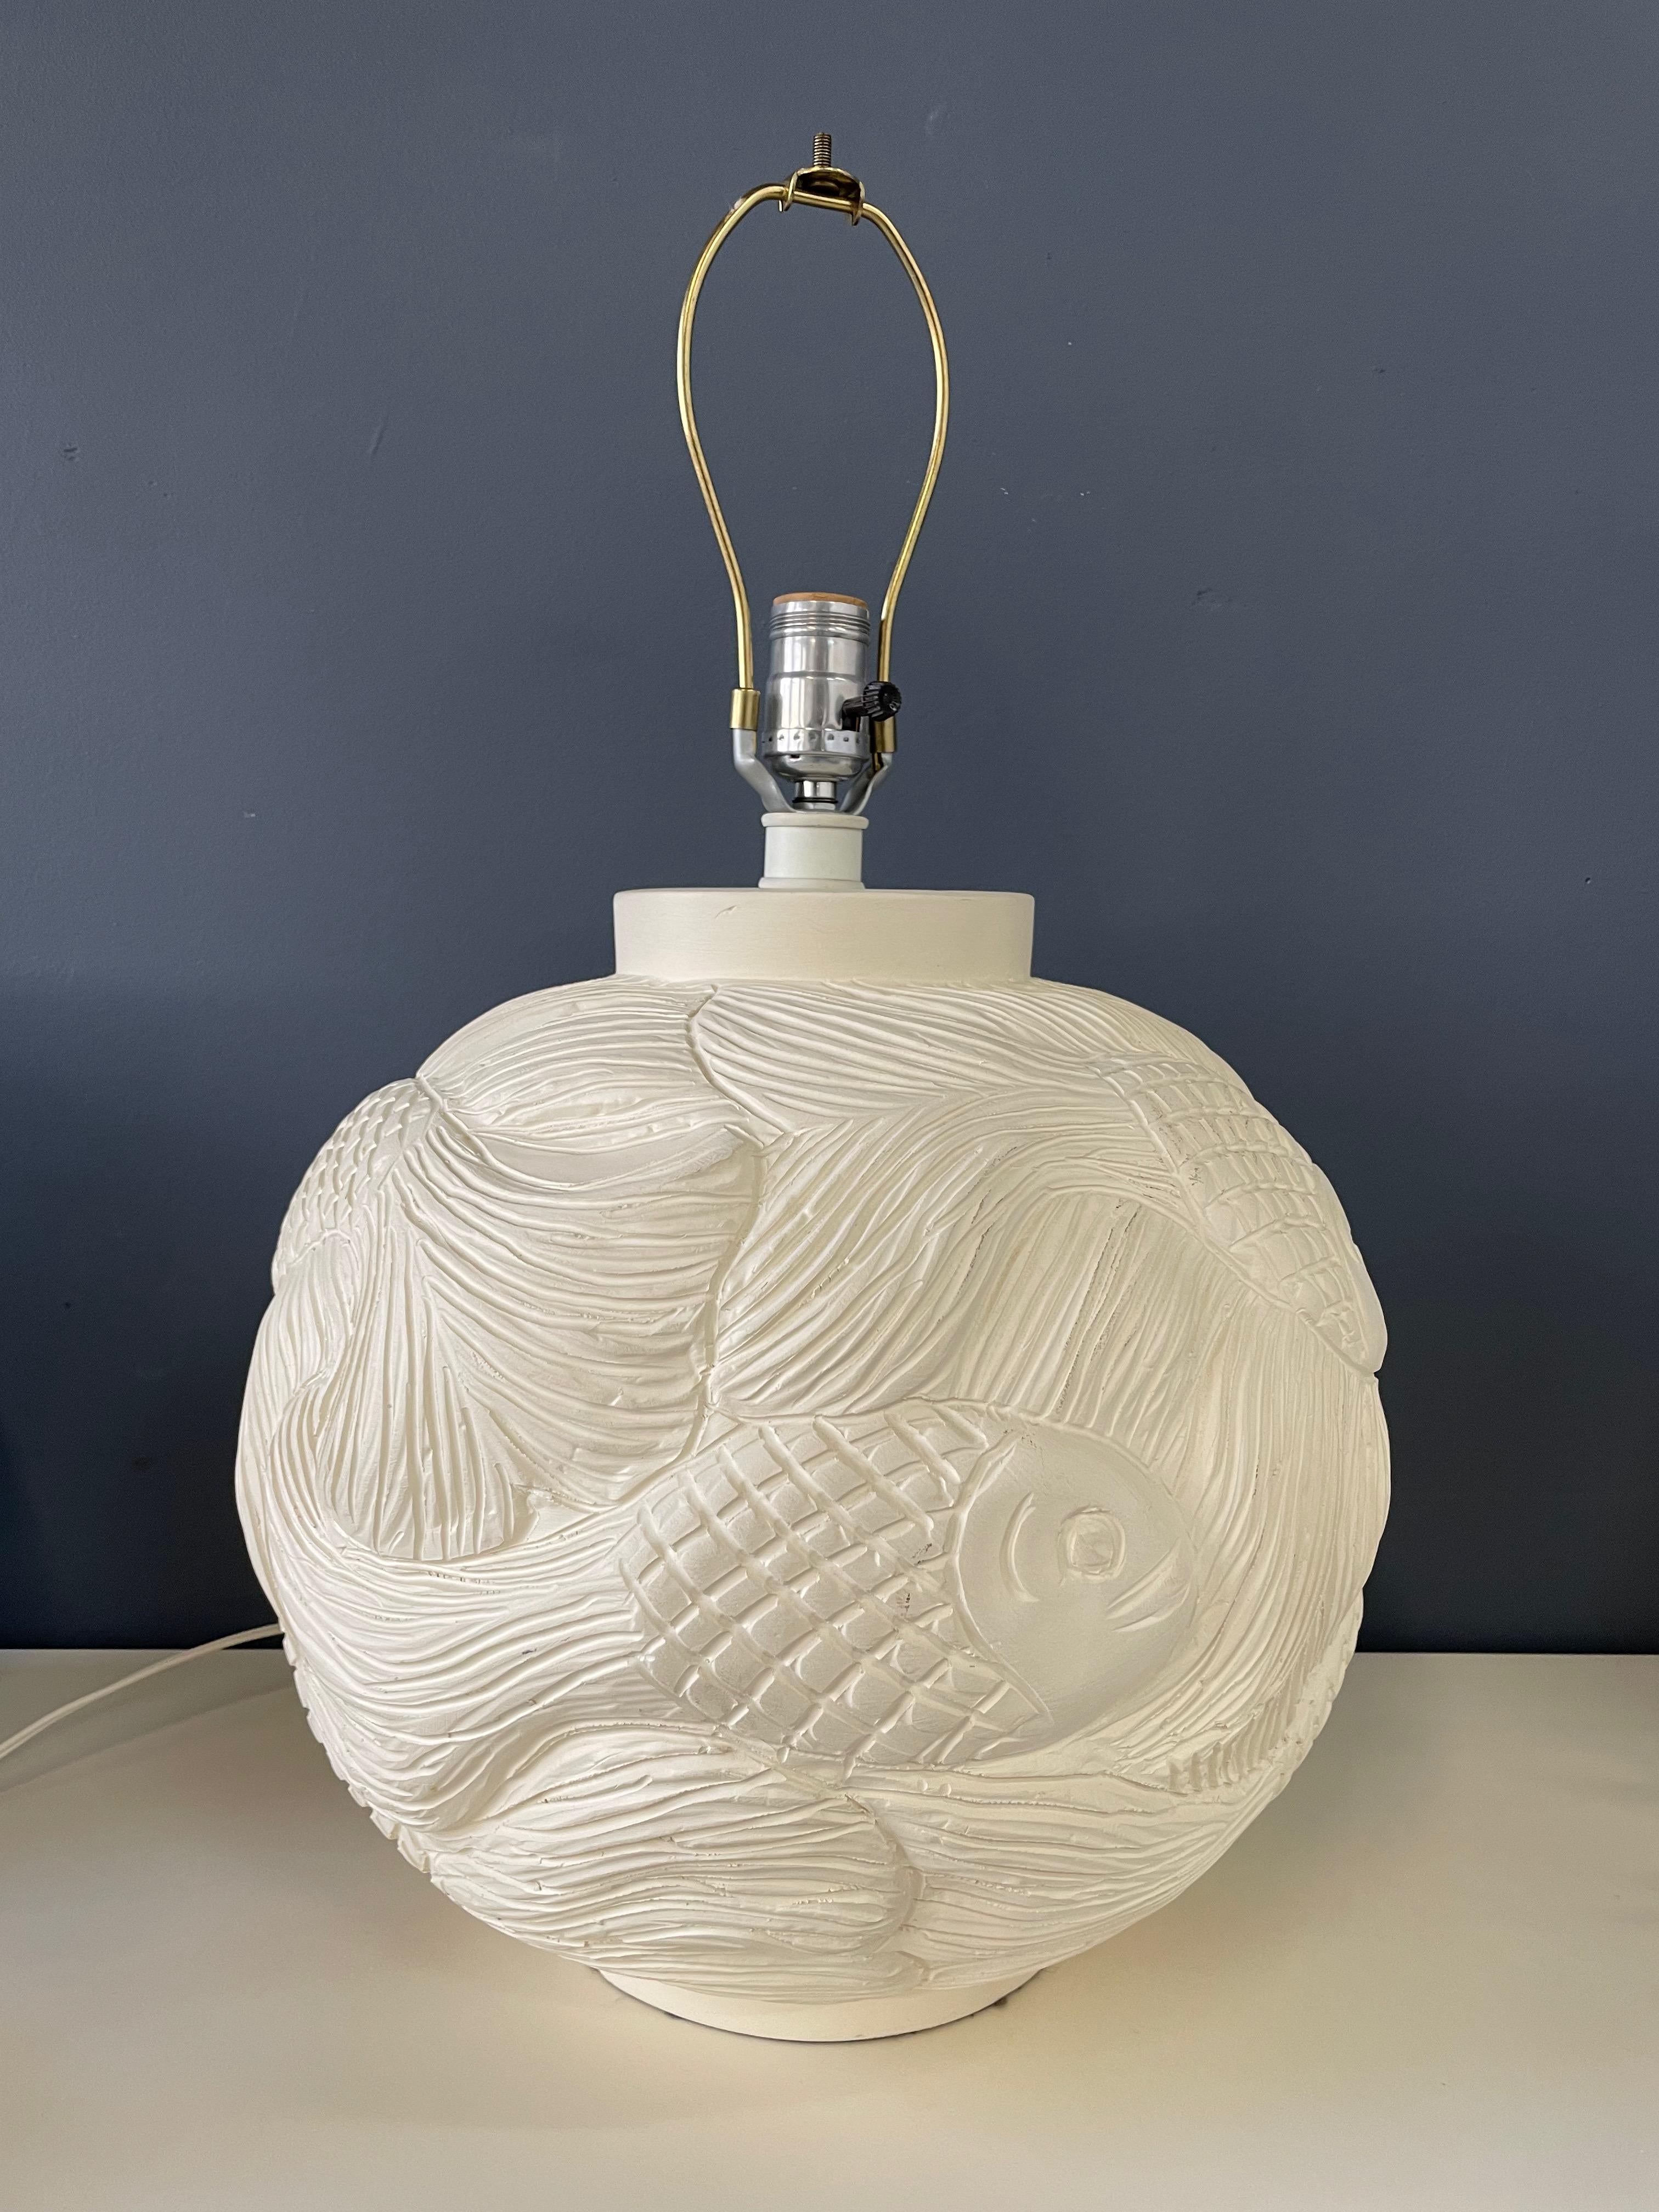 A beautiful hand crafted lamp with a pattern of swimming fish in a deeply incised method.